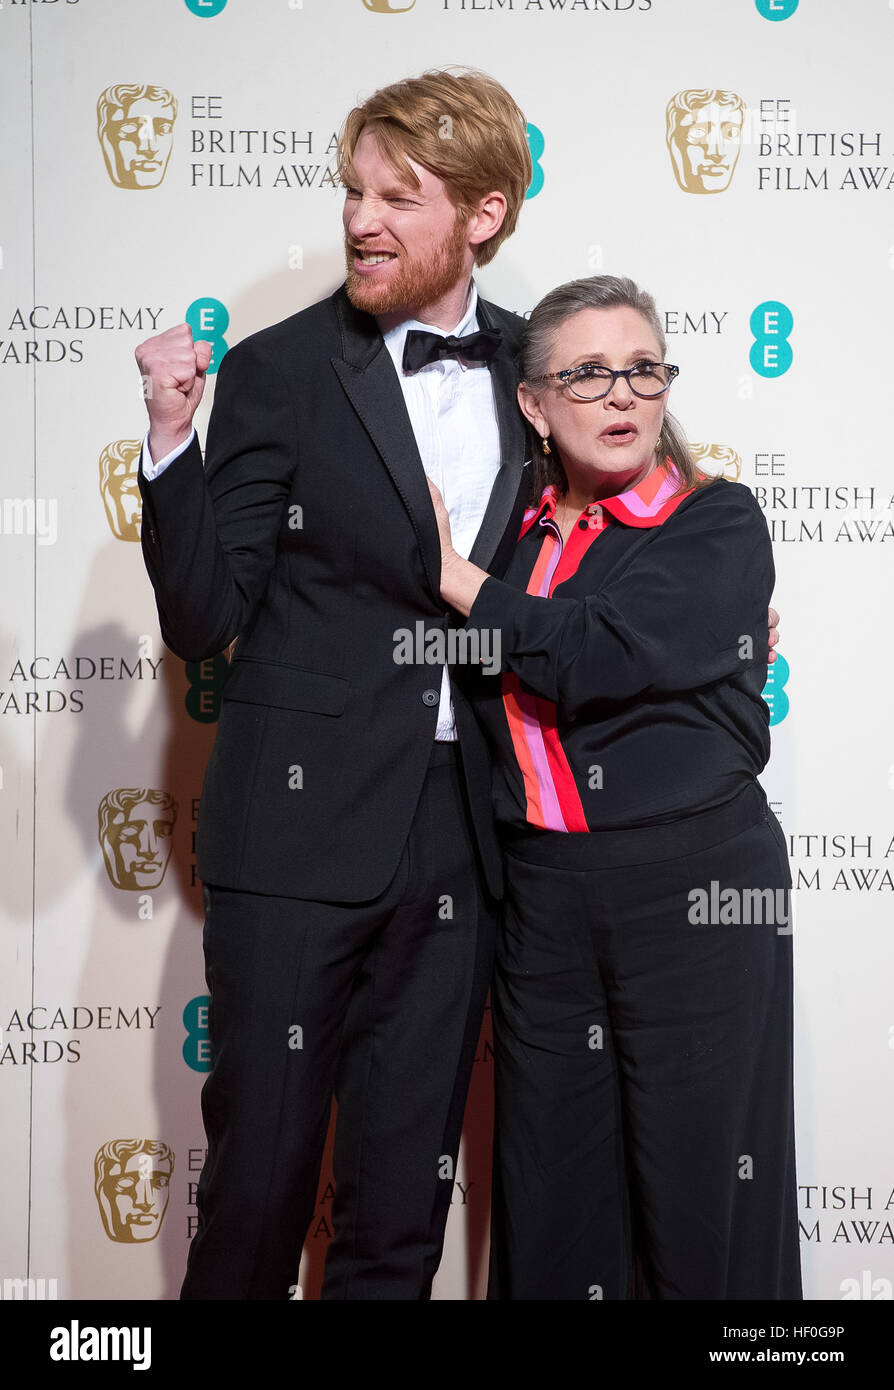 Actors Domhnall Gleeson and Carrie Fisher pose in the press room of the EE British Academy Film Awards, BAFTA Awards, at the Royal Opera House in London, England, on 14 February 2016. Photo: Hubert Boesl /dpa - NO WIRE SERVICE - | usage worldwide Stock Photo